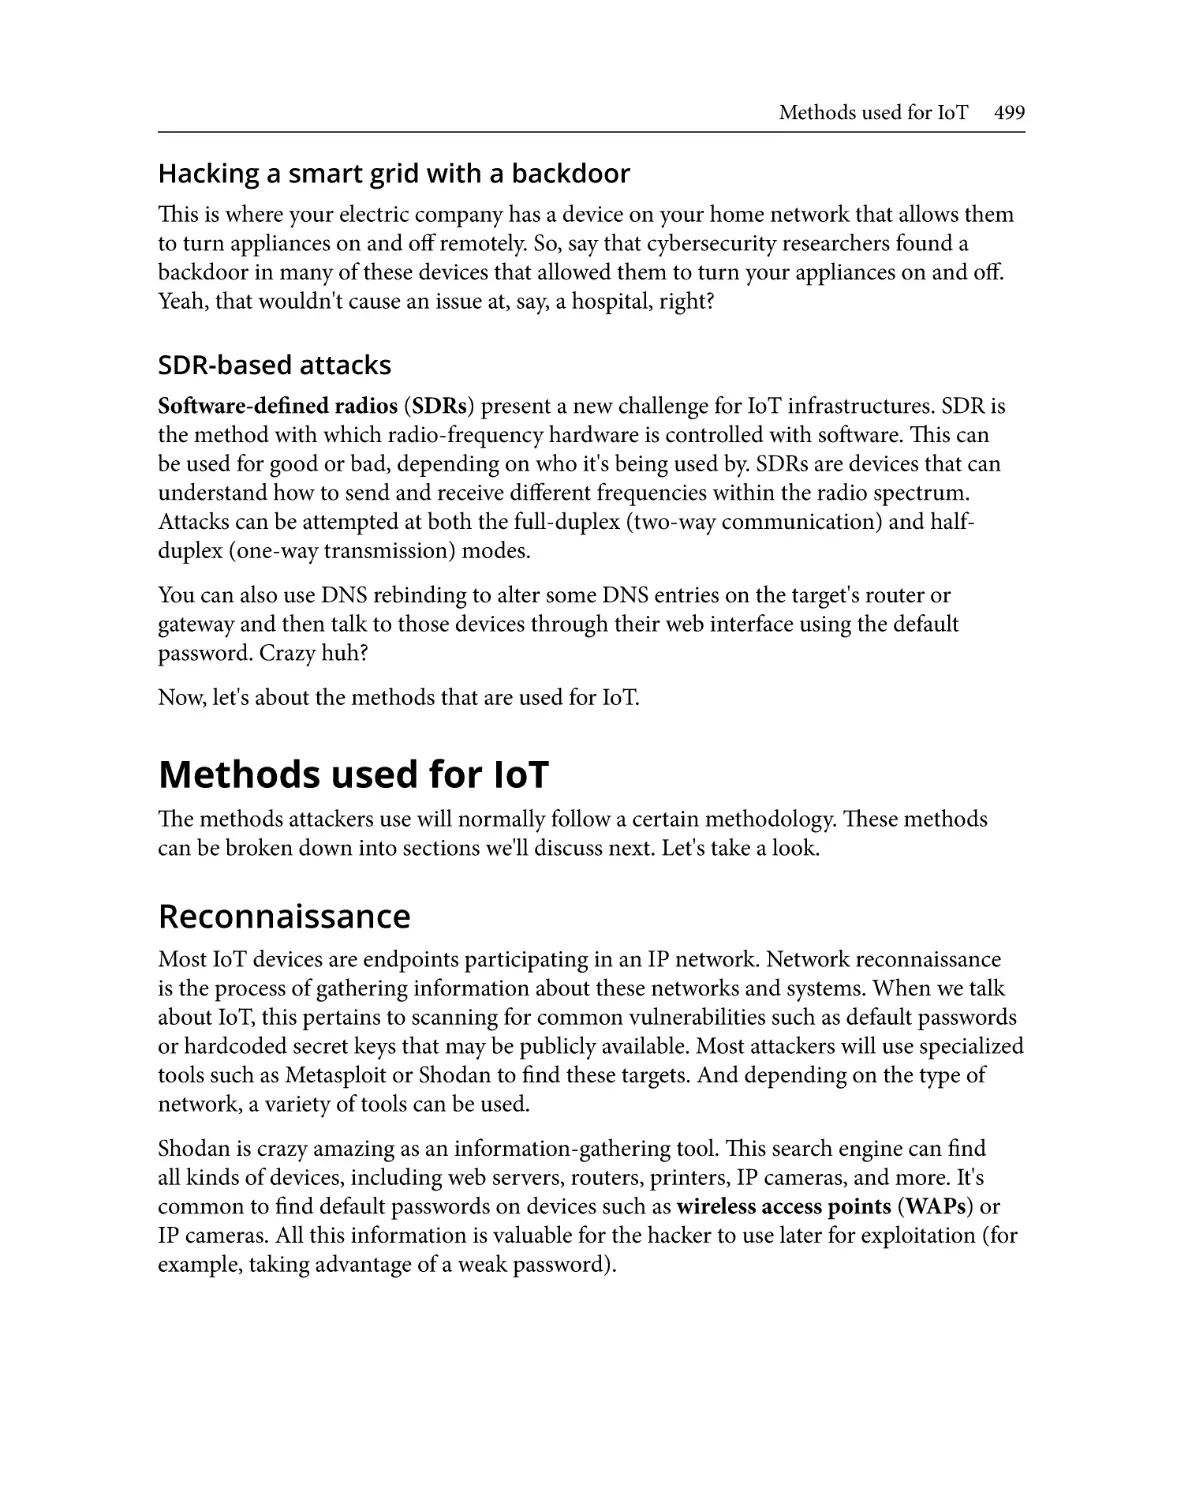 Methods used for IoT
Reconnaissance